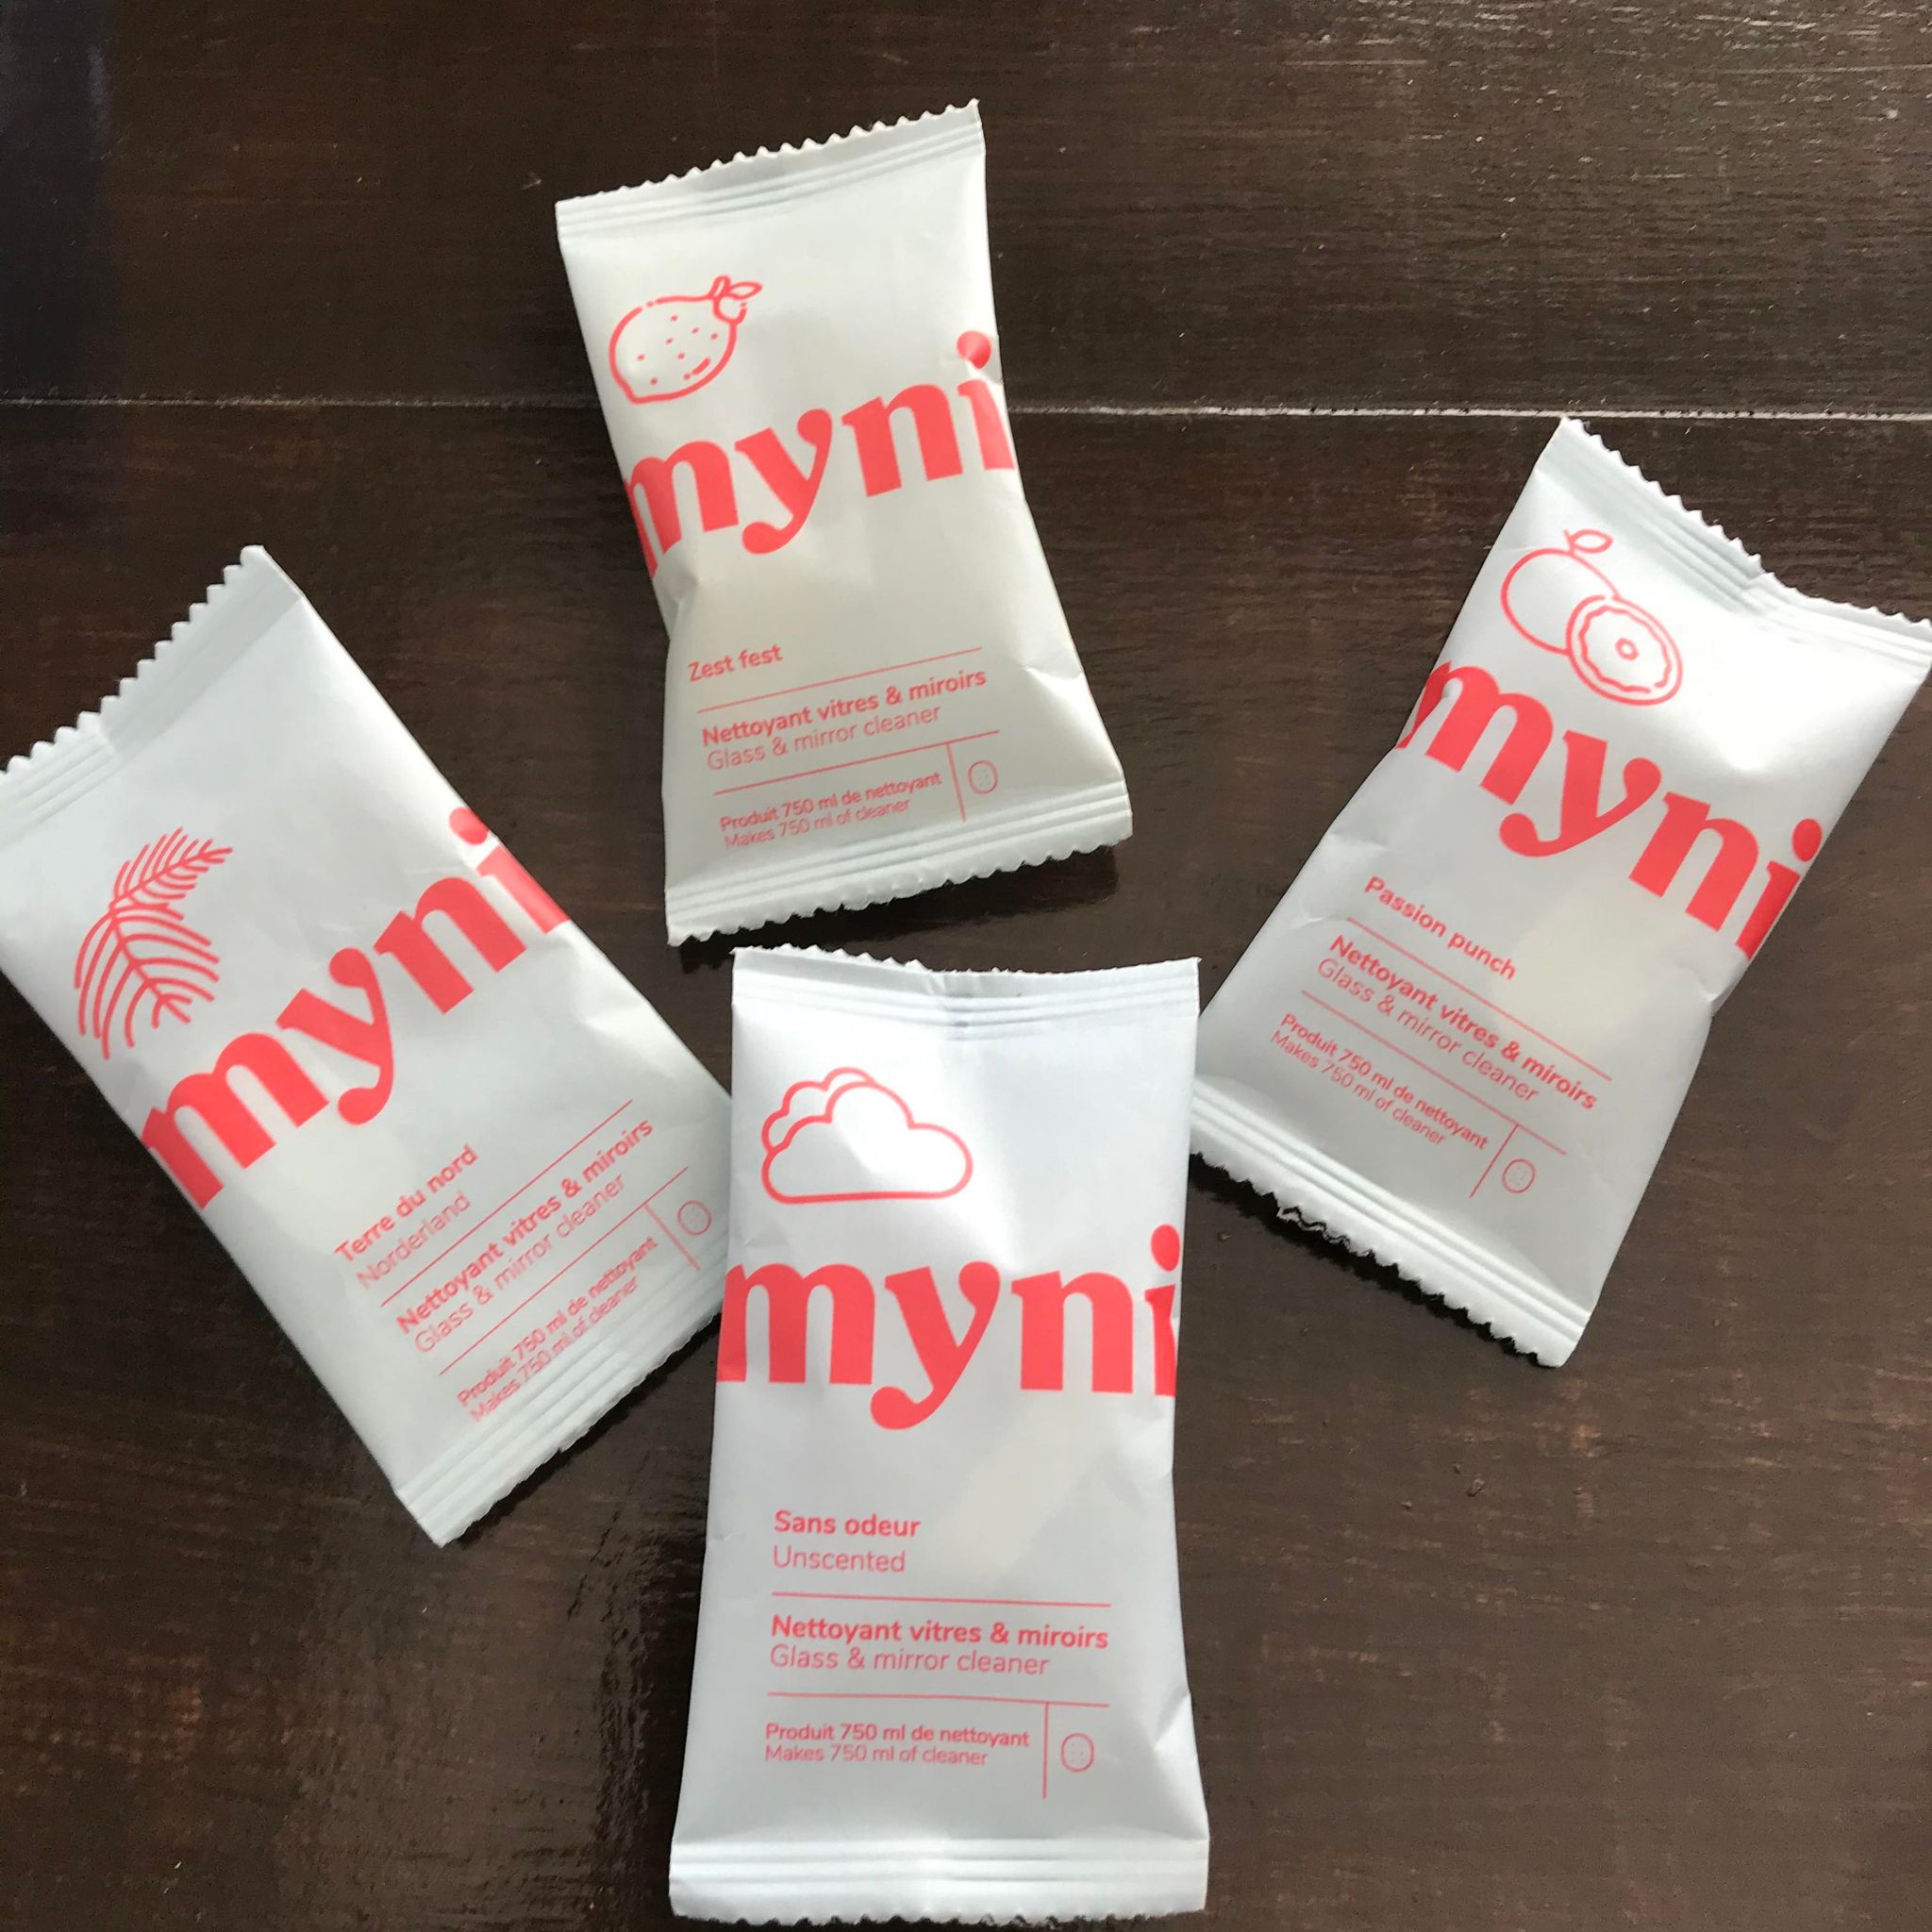 Glass and mirror cleaner concentrate tablets in compostable pouches made in canada by myni in unscented as well as Norderland (black spruce scent), Zest Fest (lemon mint scent) and Passion Punch (grapefruit and mango scent)